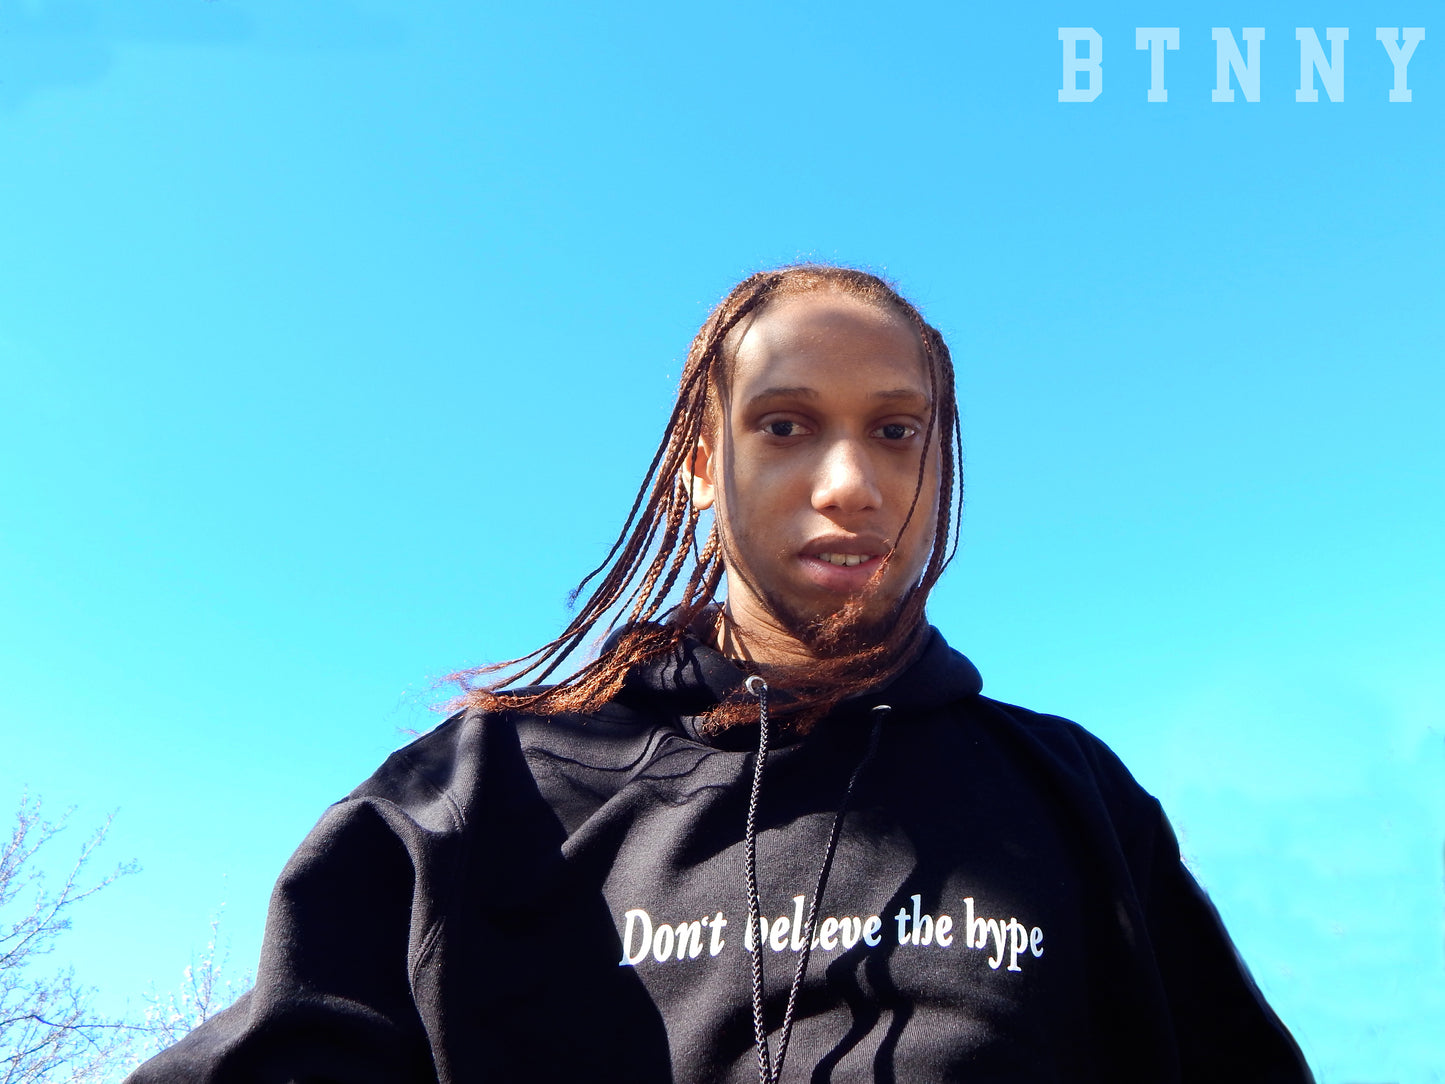 Don't Believe The Hype Pullover Hoodie